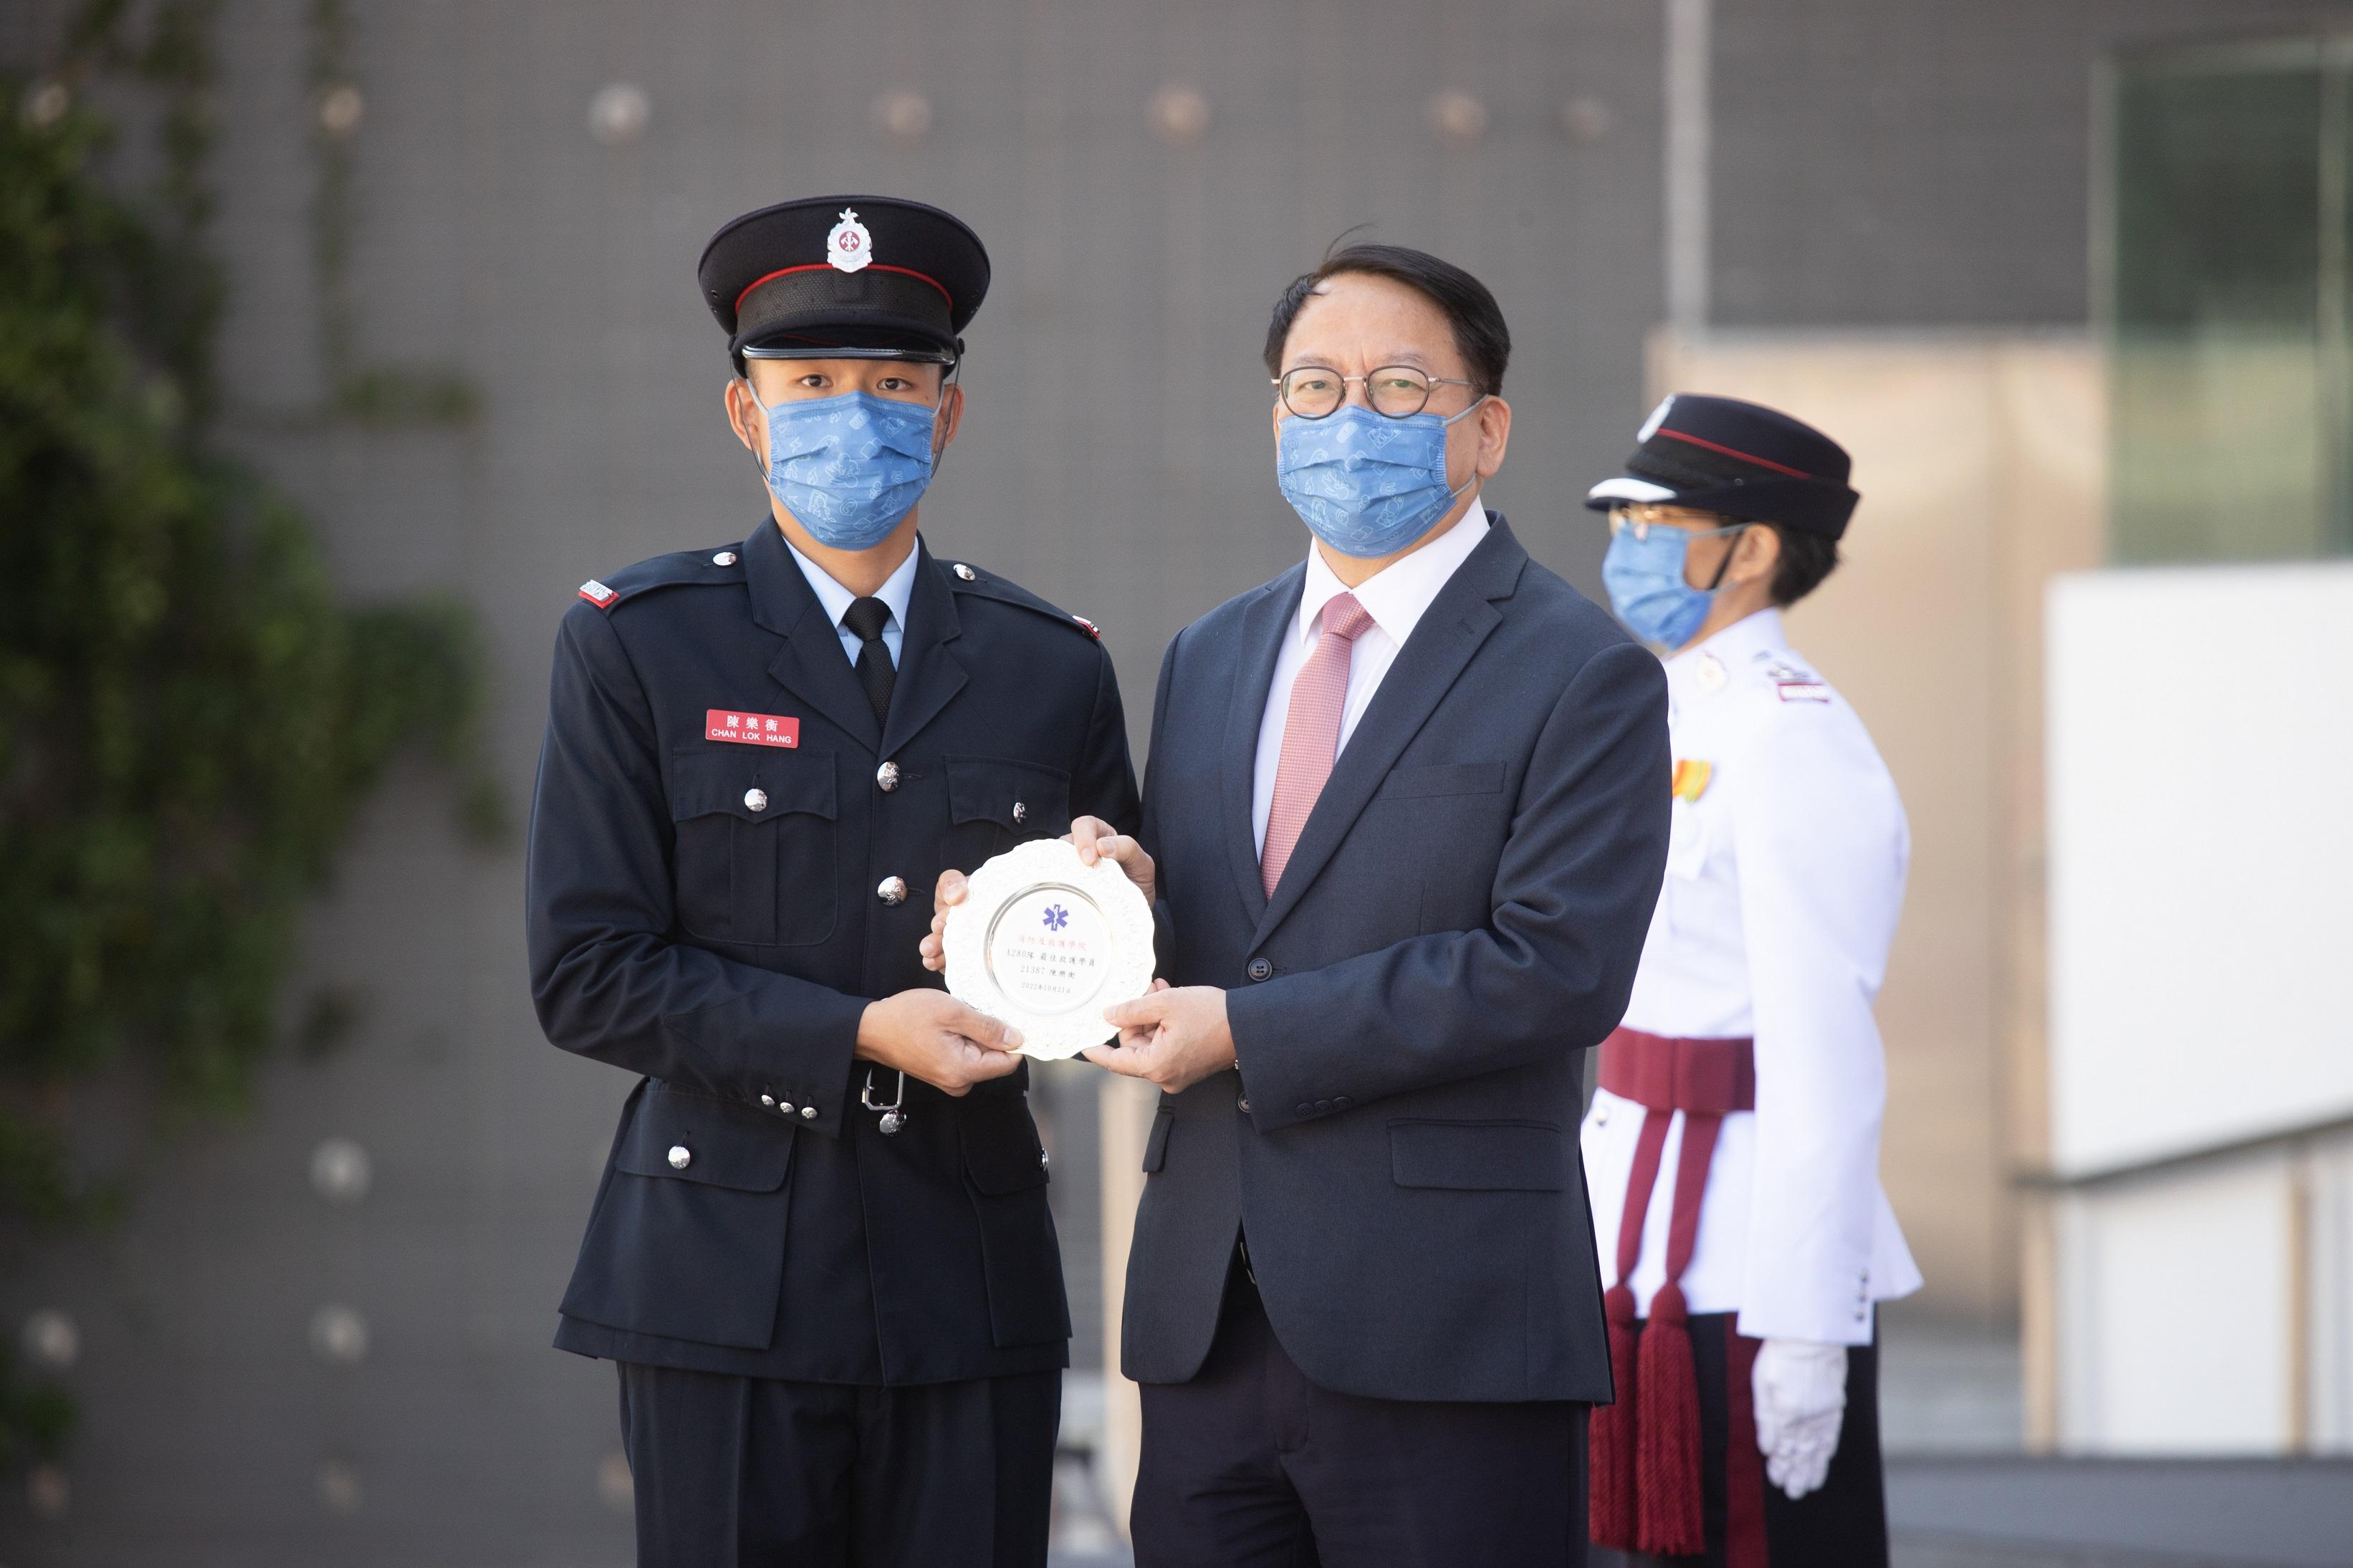 The Chief Secretary for Administration, Mr Chan Kwok-ki, reviewed the Fire Services passing-out parade at the Fire and Ambulance Services Academy today (October 21). Photo shows Mr Chan (right) presenting the Best Recruit Ambulanceman award to a graduate.